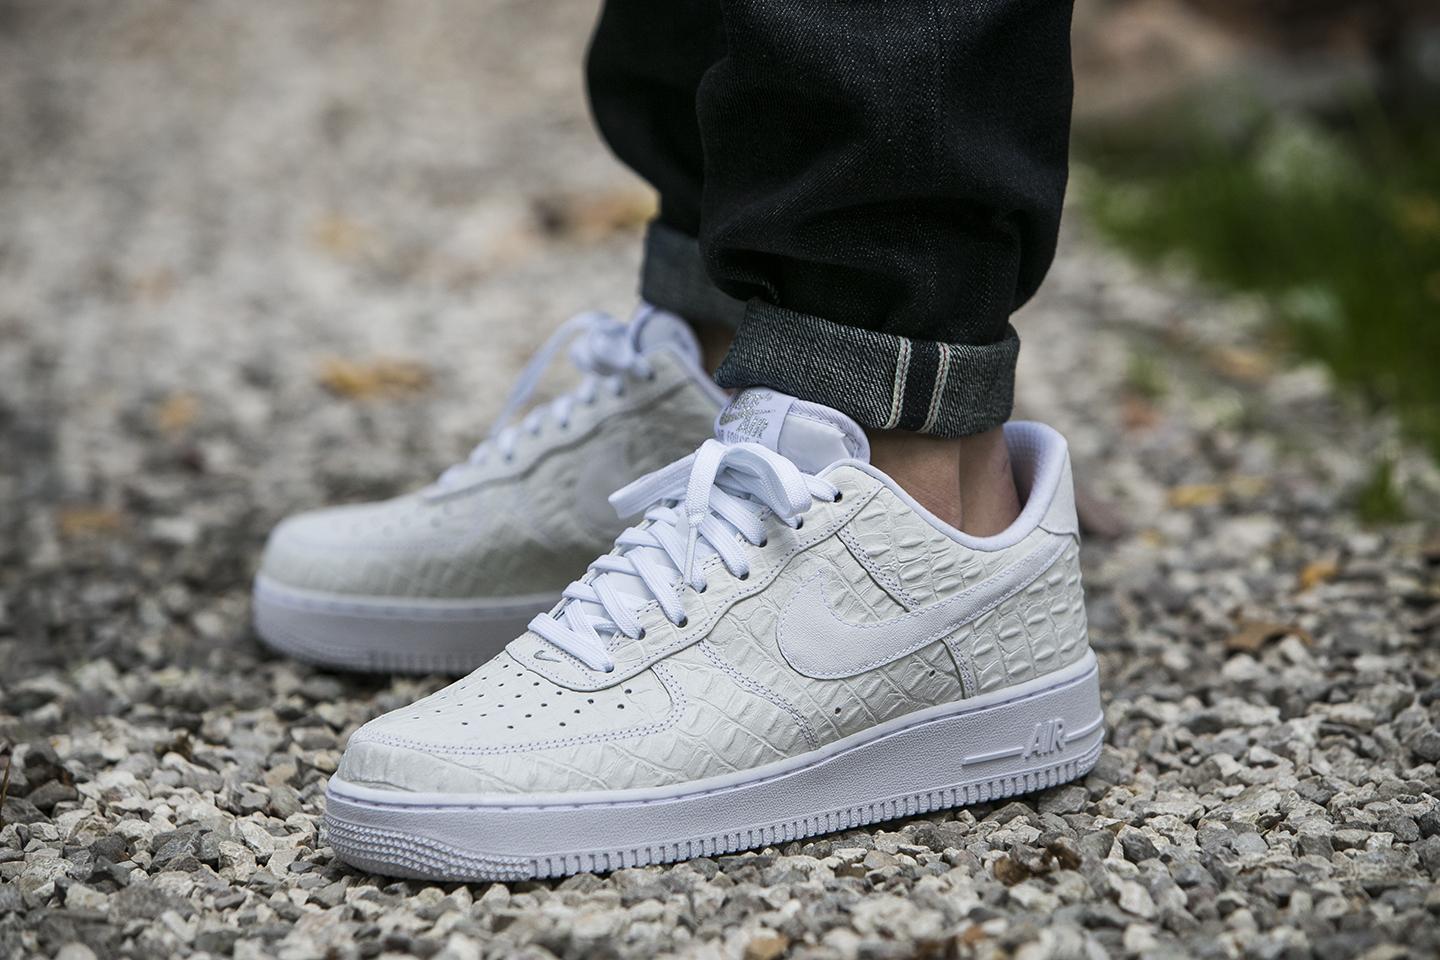 Intacto Morbosidad bombilla worldbox on Twitter: "Nike Air Force 1 Low 07 LV8 "Croc Pack-White"  (718152-103) #HypeBeast #KicksOnFire store. http://t.co/IQzovX9vqj  http://t.co/nGm05aW1Wp" / Twitter